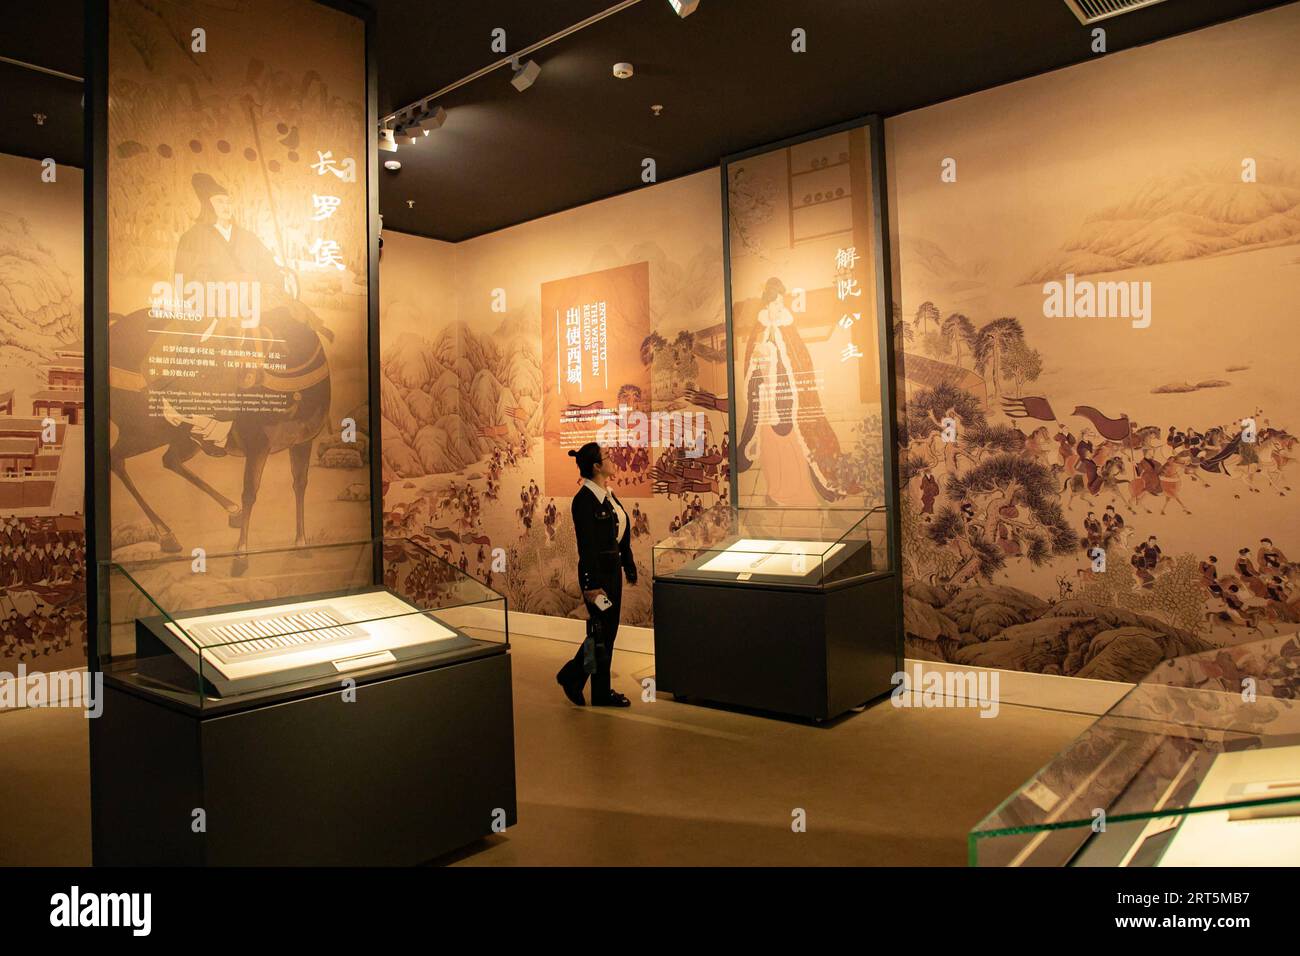 230907 -- LANZHOU, Sept. 7, 2023 -- A visitor views exhibits at the new hall of Gansu bamboo slip museum in Lanzhou, northwest China s Gansu Province, Sept. 7, 2023. The new hall of a bamboo slip museum in Gansu opened on Thursday, with more than 1,000 ancient bamboo slips on display. Most of these slips are being showcased for the first time since they were discovered, including those dating back some 2,000 years to the Han Dynasty 202 BC-AD 220. Located along the Hexi Corridor, part of the ancient Silk Road in northwest China, Gansu has a dry climate, and therefore, the ancient bamboo slips Stock Photo